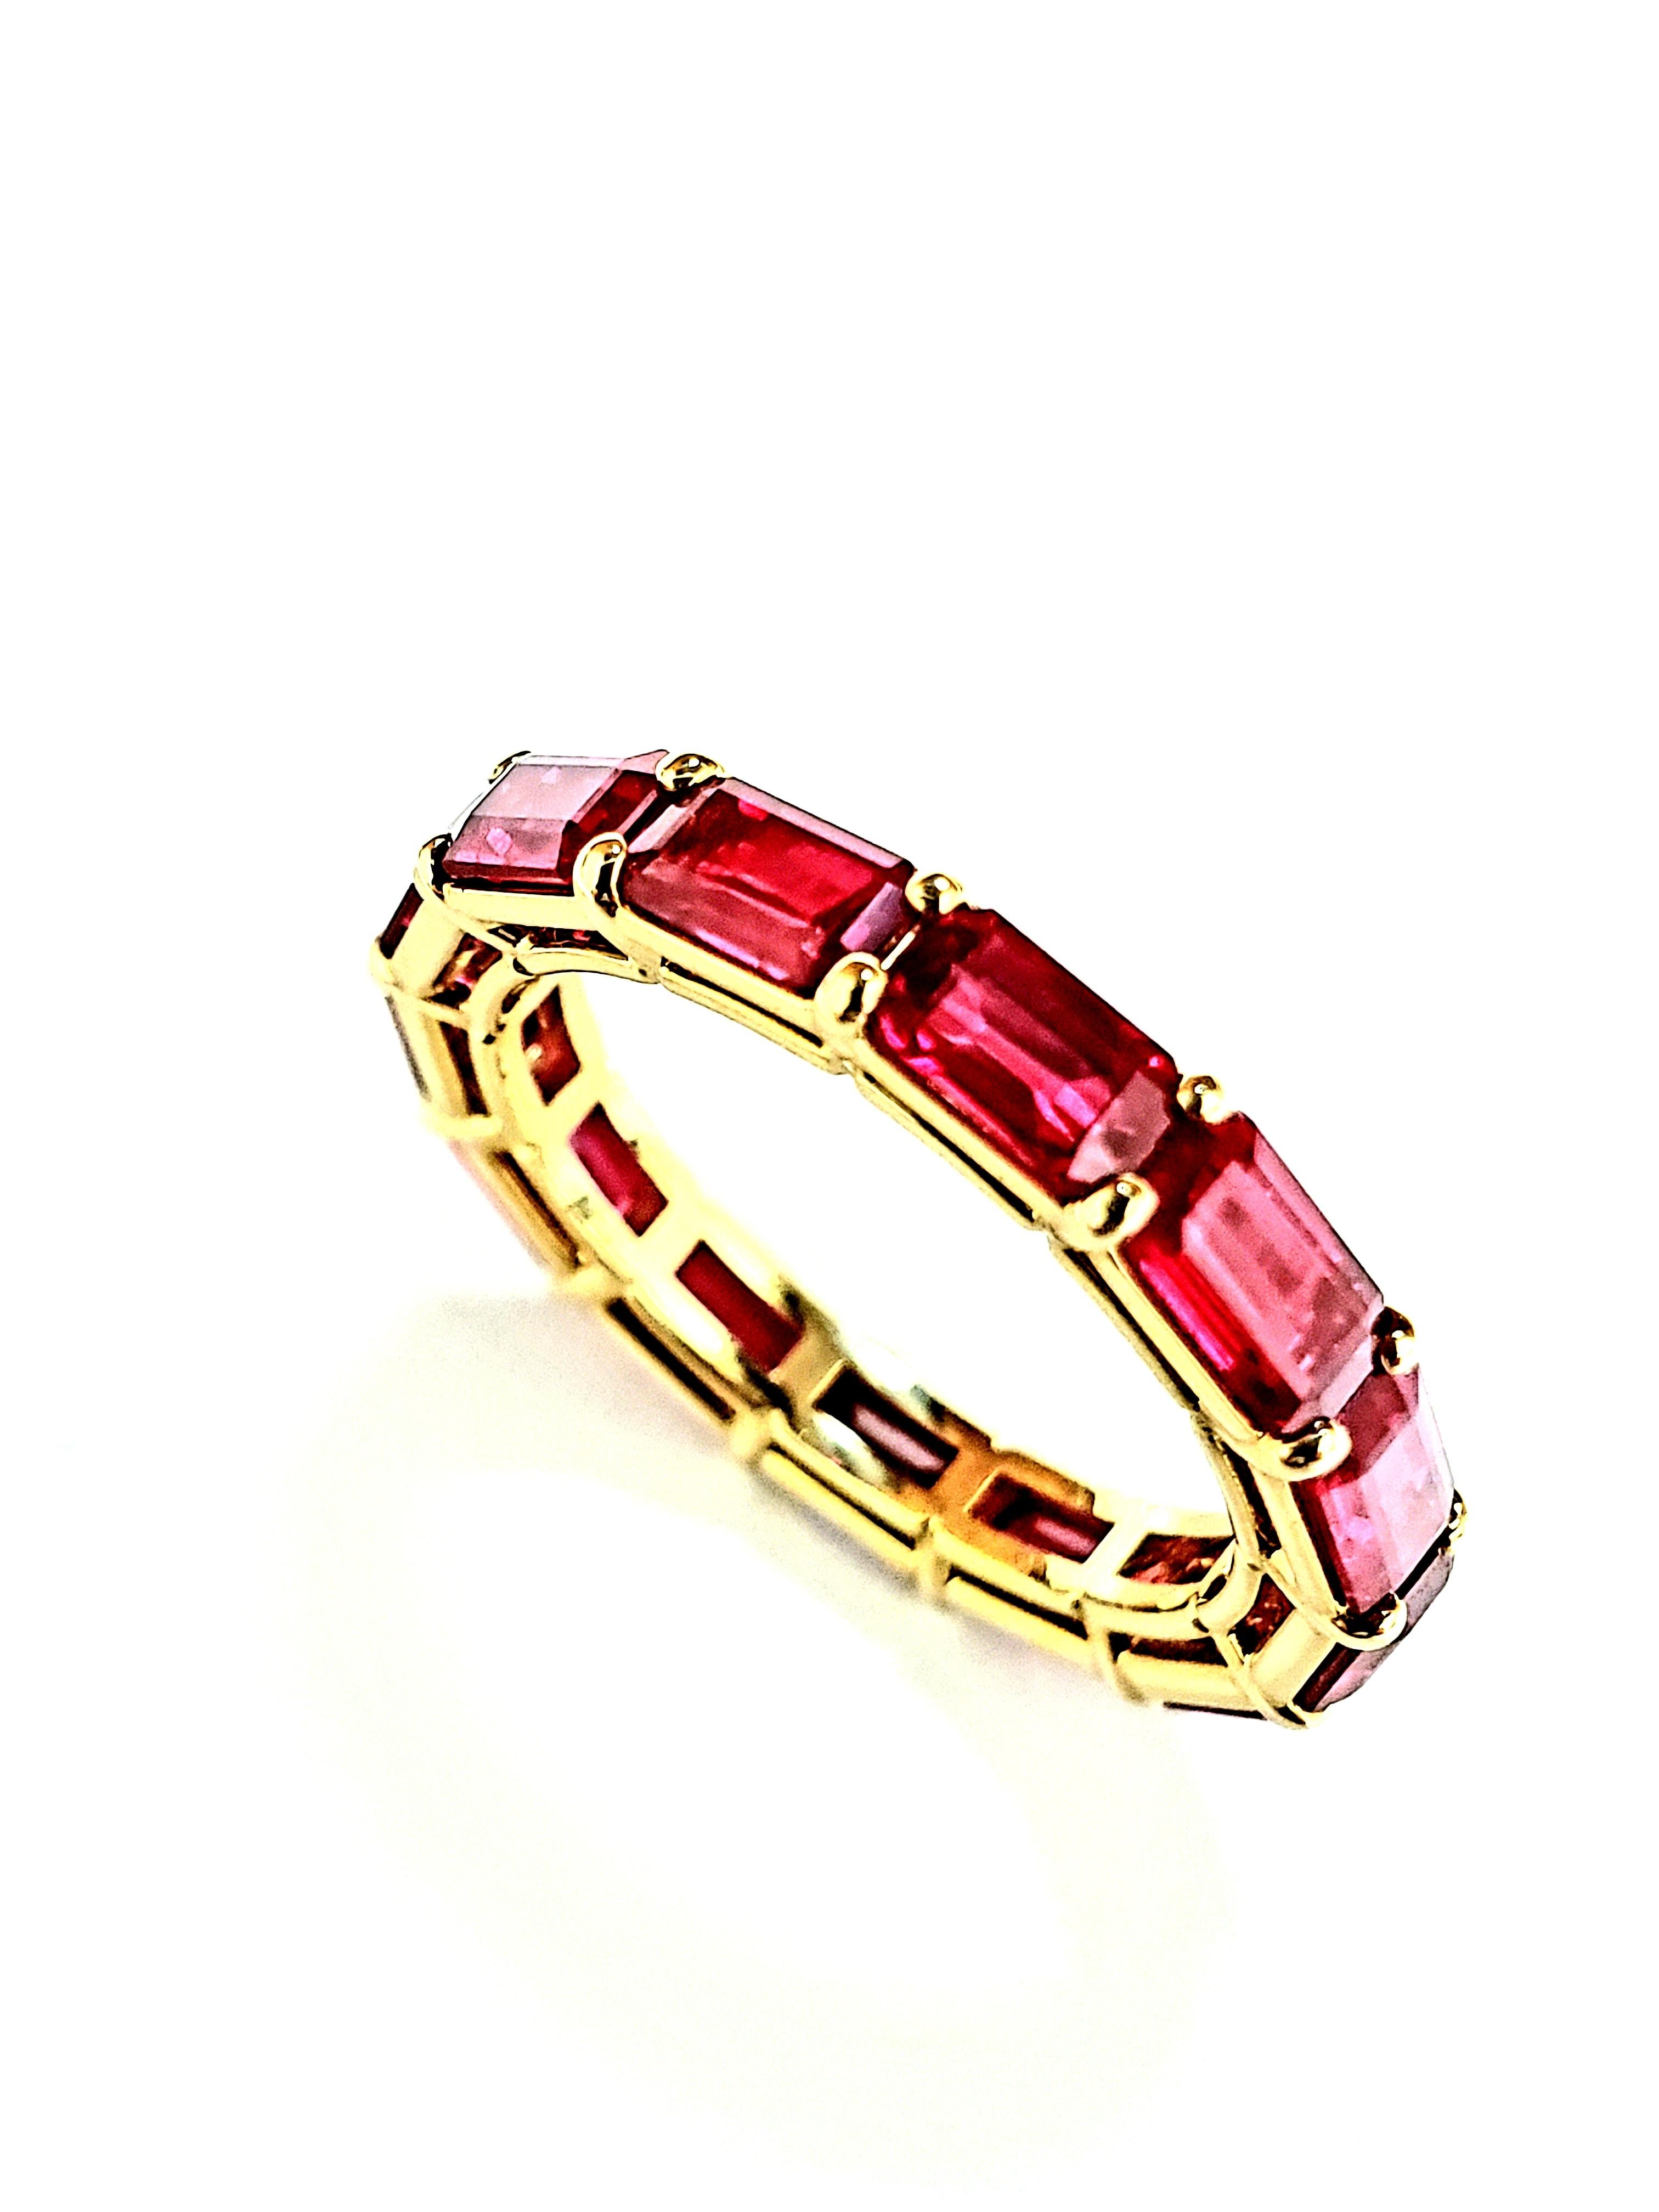 From Our Showroom, a One of a Kind, Handmade 18 Karat Yellow Gold & Natural Burmese Ruby Ring.
Ring is Set East-West in a Common Prong Mounting, with an Open Gallery.
13 Rubies total 4.55 Carats.
Ring is a Size 6. It Can't Be Sized, But Can Be
Made